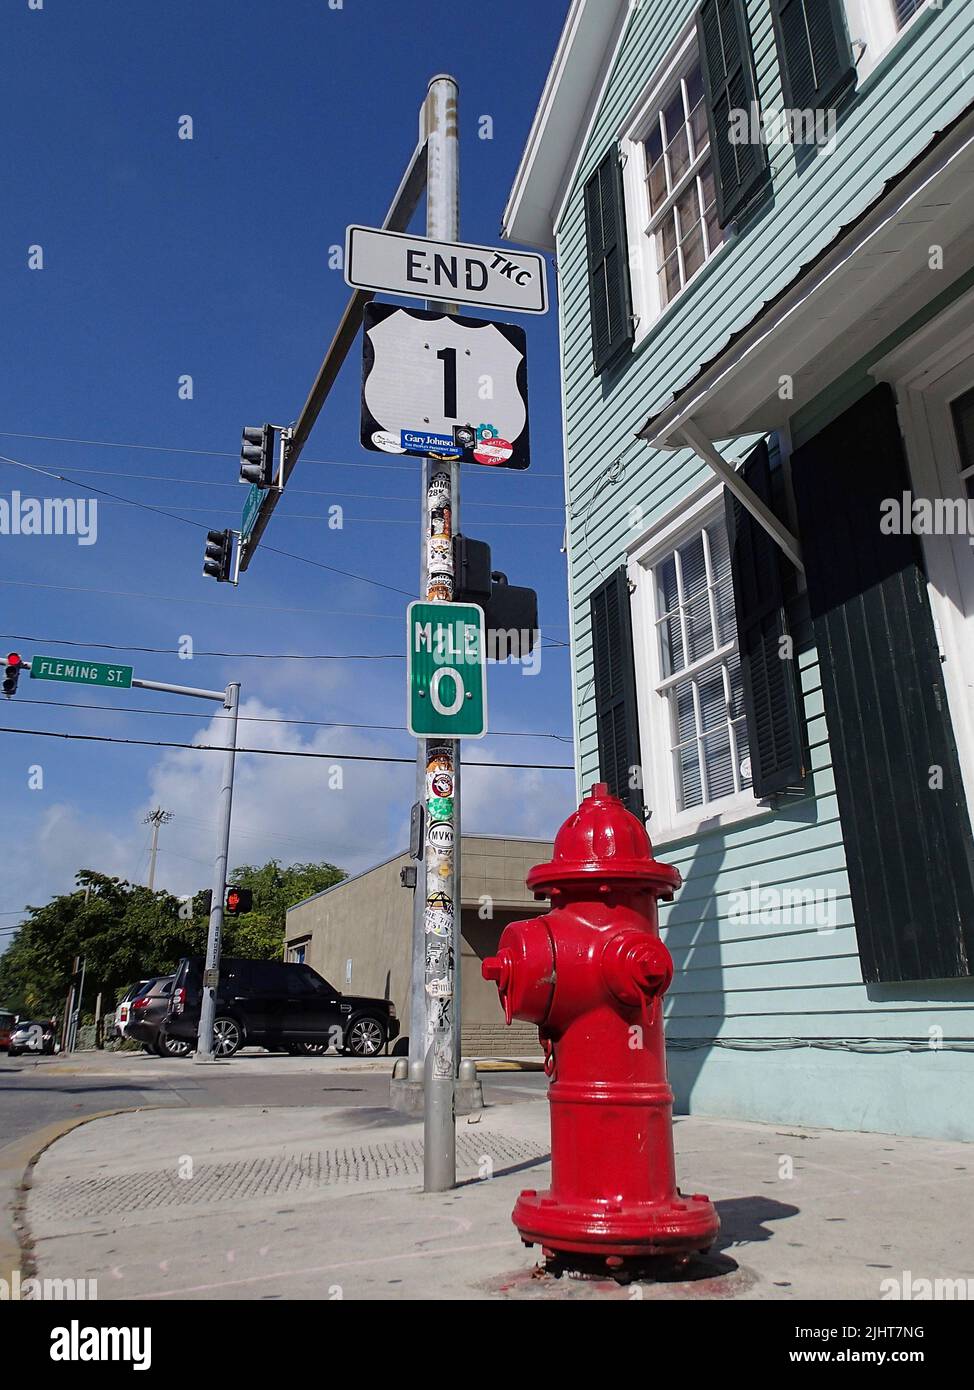 Key West, Florida, USA - 12 24 2012: red fire hydrant at ta cross of highway number 1 at Mile 0 Stock Photo